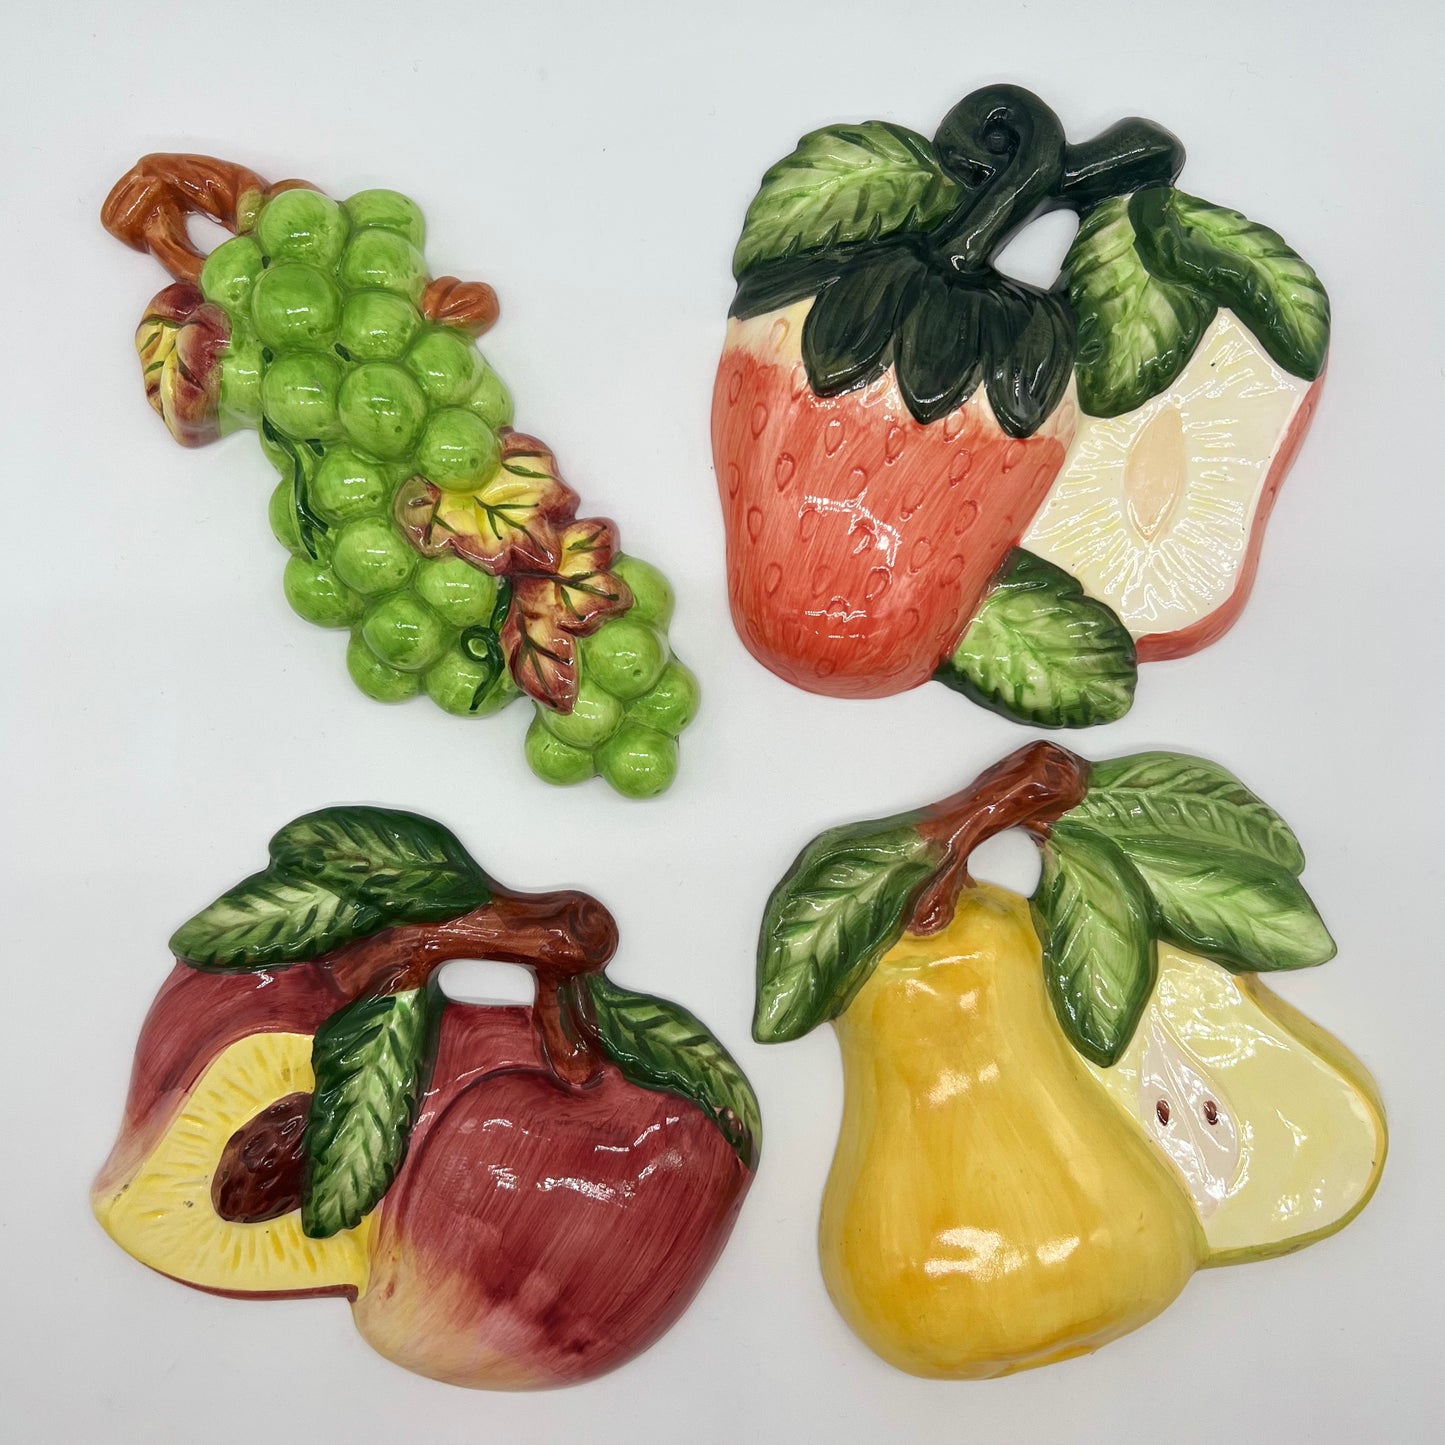 Vintage MCM Ceramic Wall Hanging Fruit Plaques, Set of 4 (Grape, Pear, Peach, Strawberry)